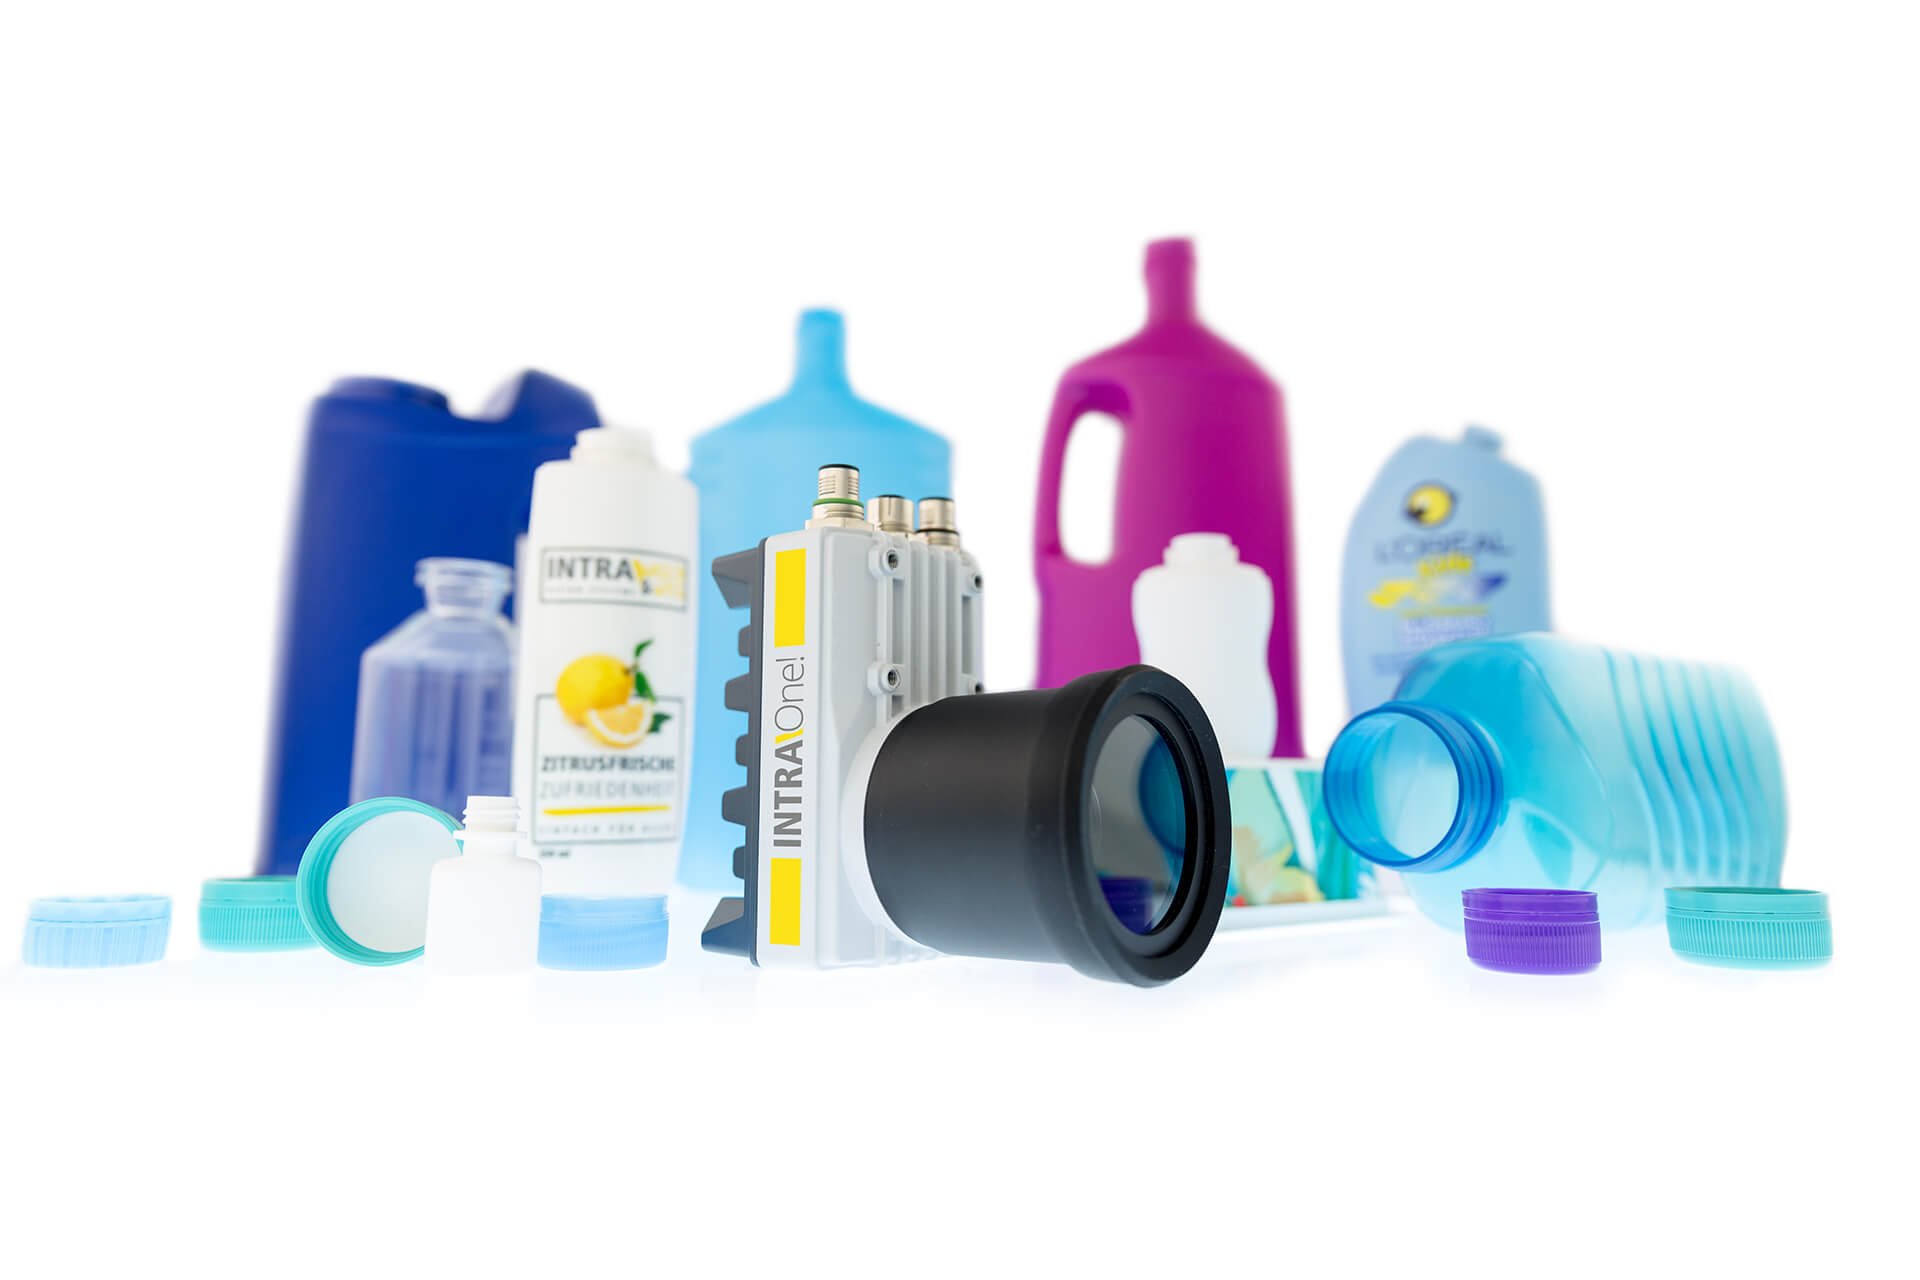 intravis-vision-inspection-intraone-universal-solution-closue-bottle-label-container-1920x1280px